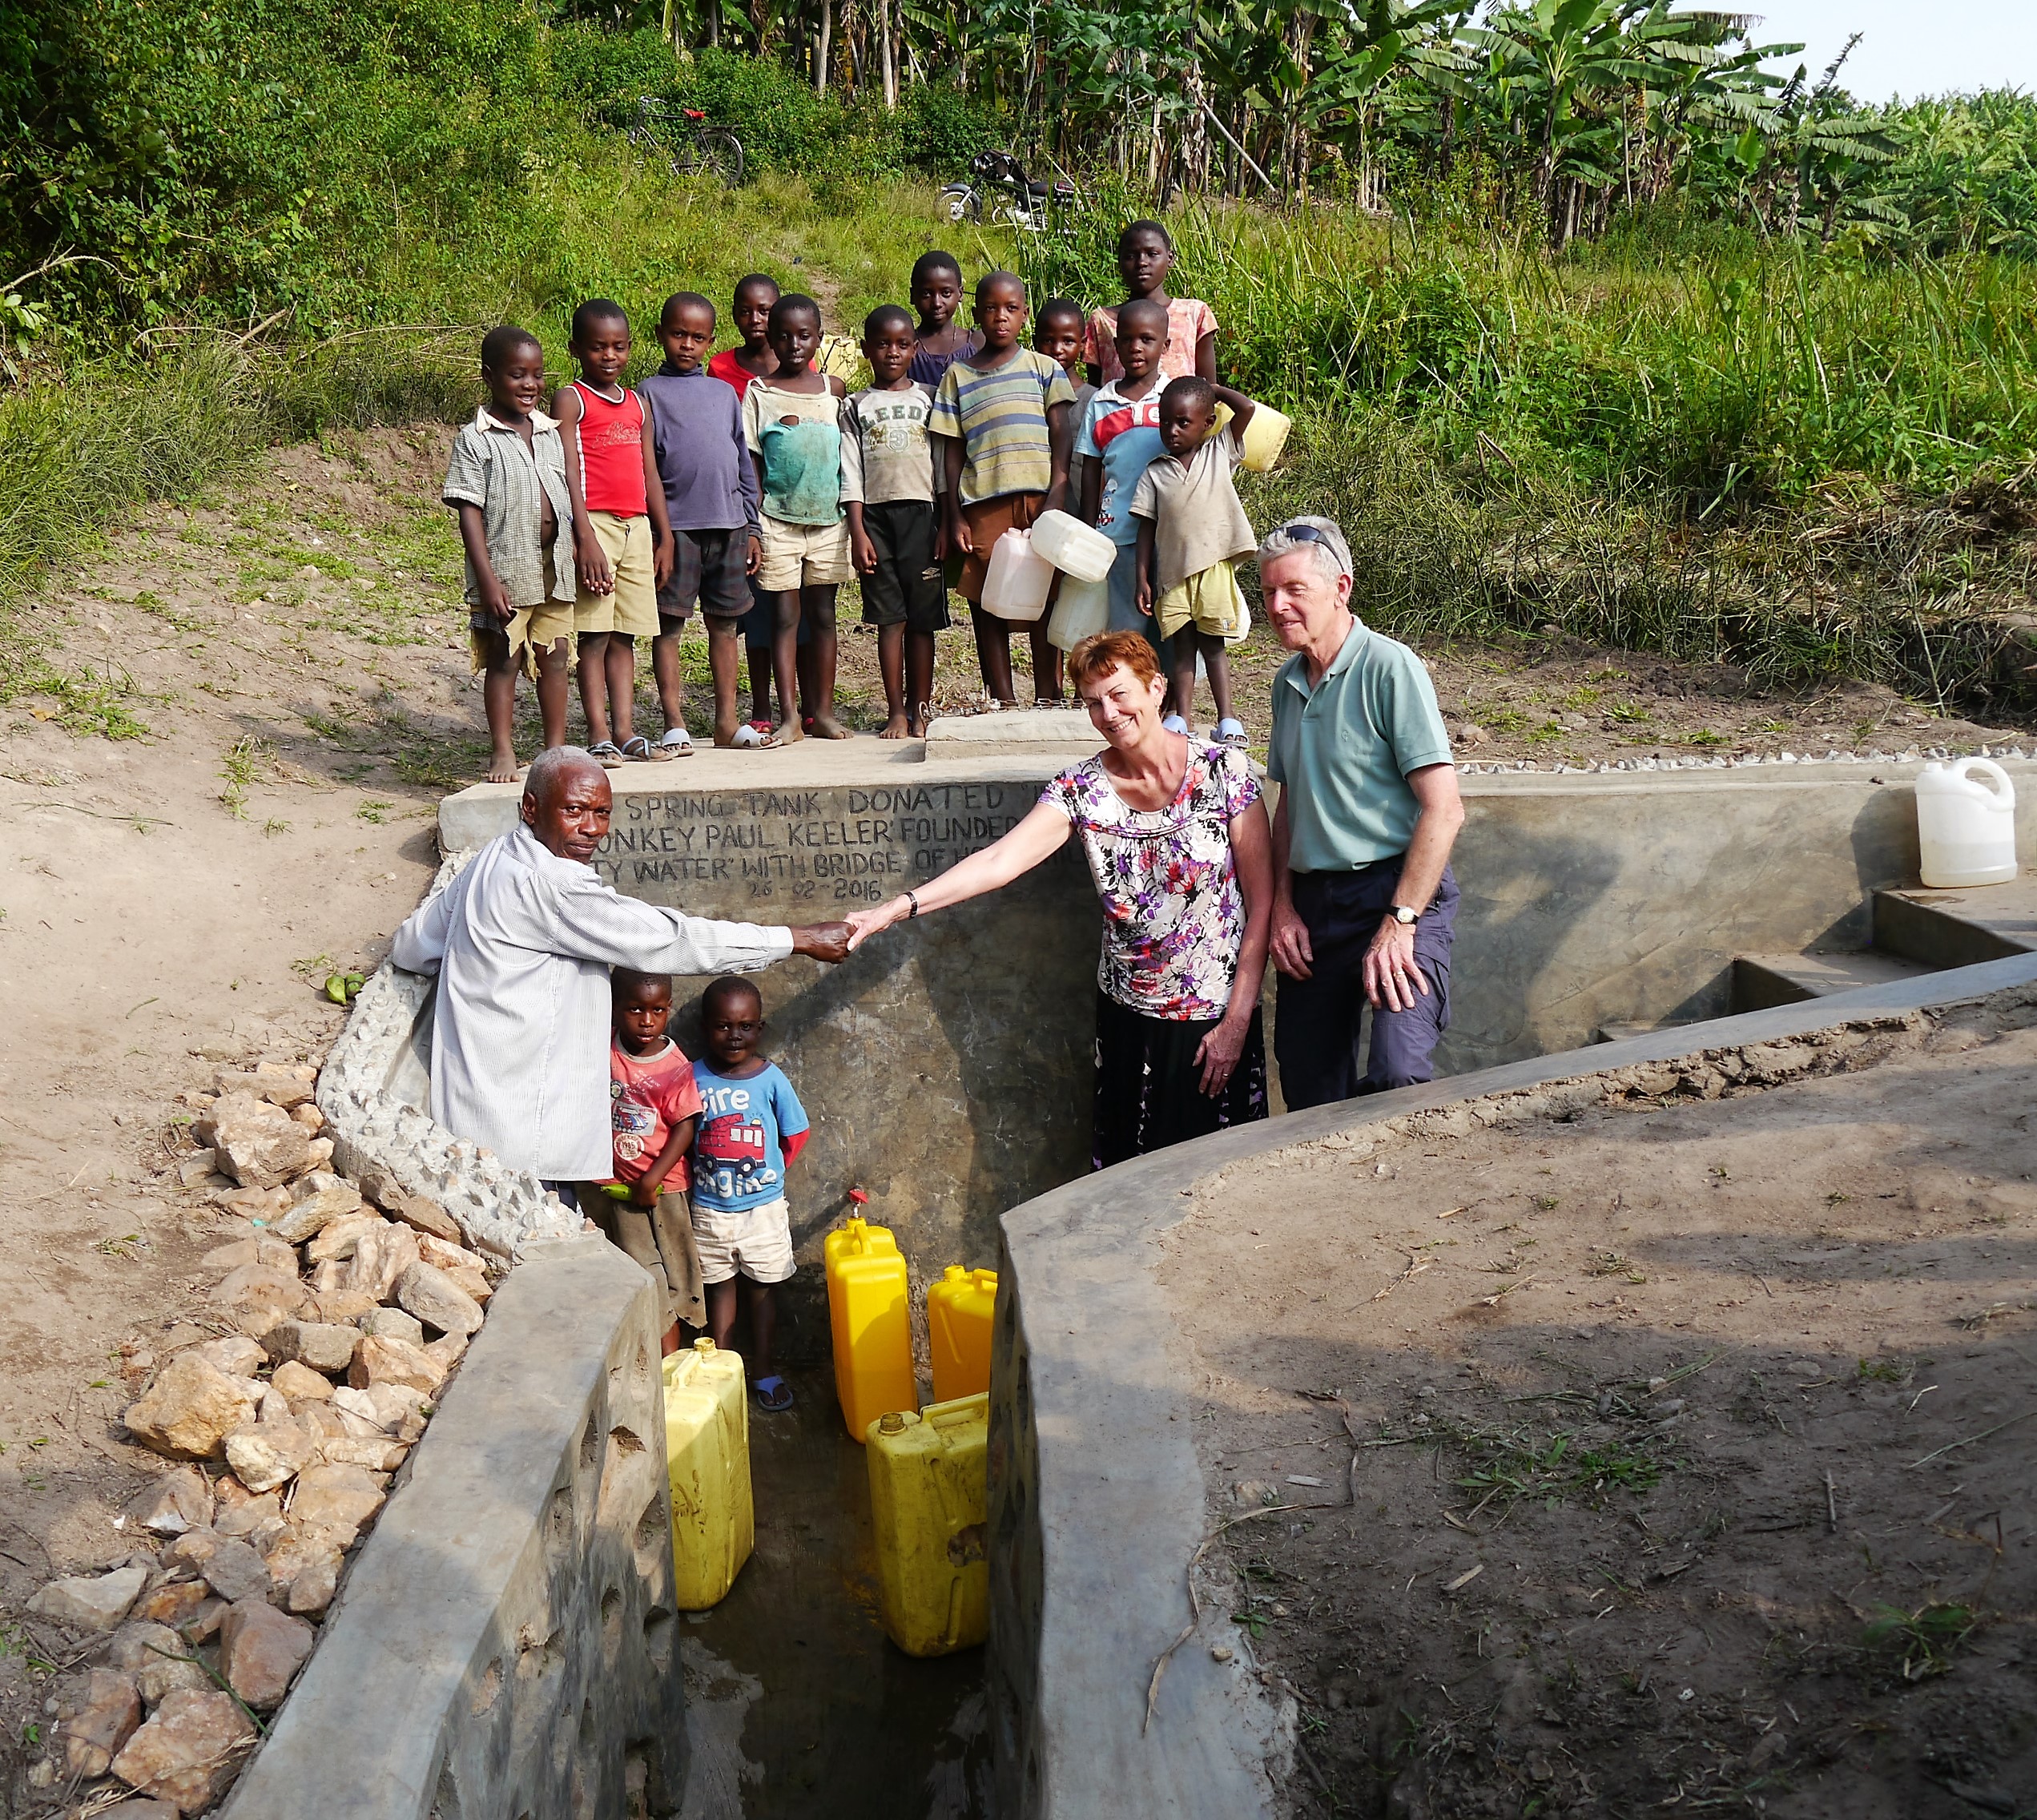 Another community receive clean water